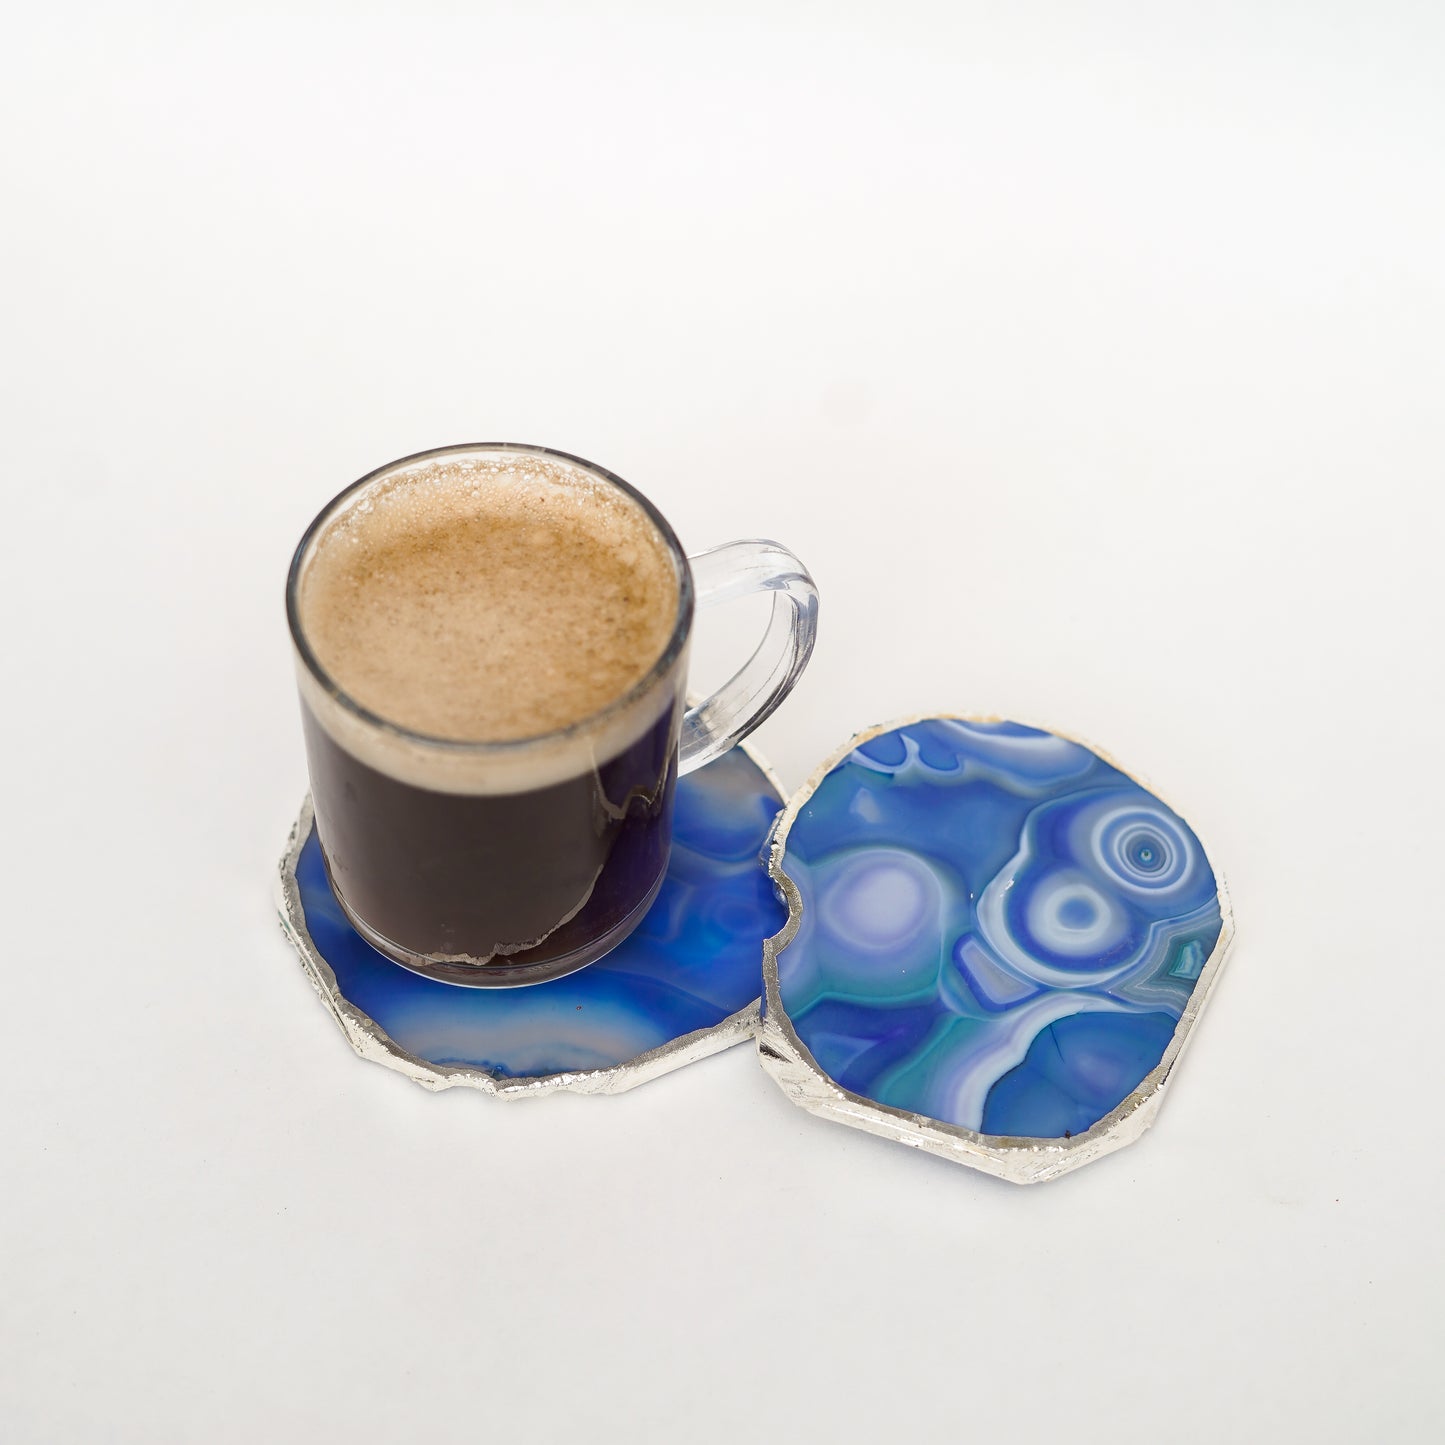 Brazilian Agate Stone Silver Plated Coaster Beautiful Coaster Fit for Tea Cups Coffee Mugs and Glasses Perfect Table Accessories Tableware Set of 2- Blue